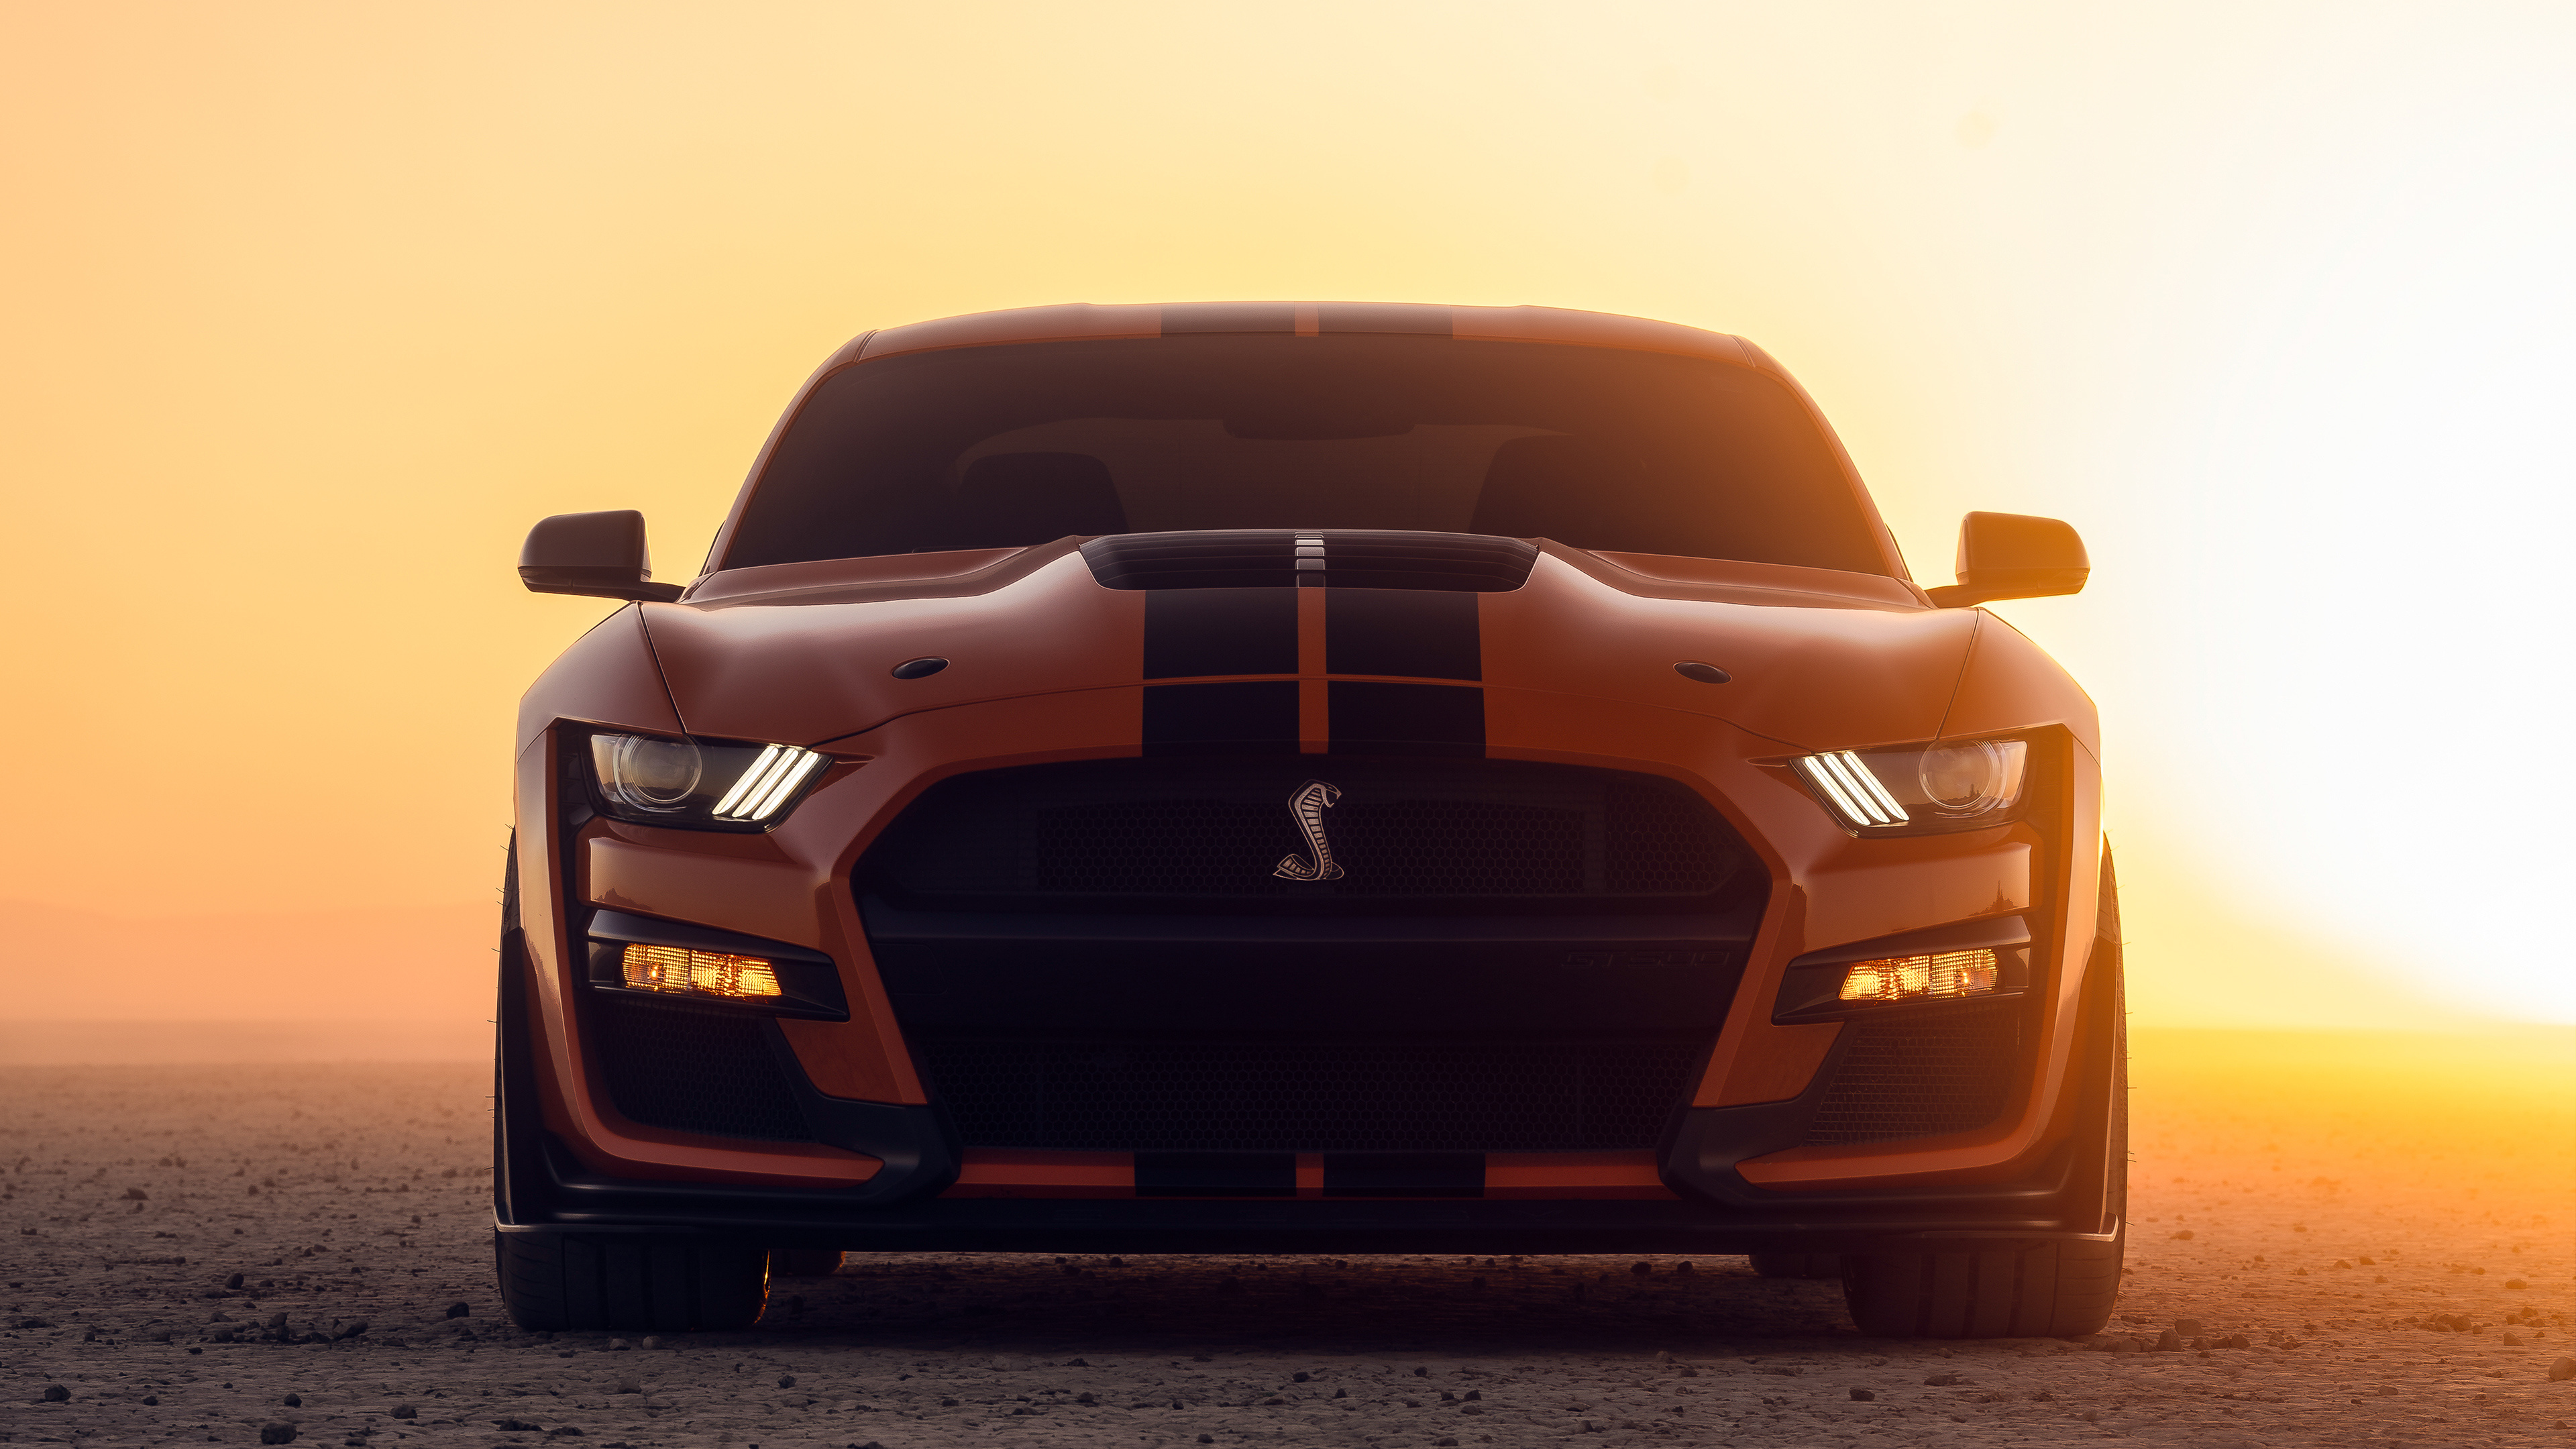 GT500, Yellow Ford Mustang, HD cars, Stunning images, 3840x2160 4K Desktop